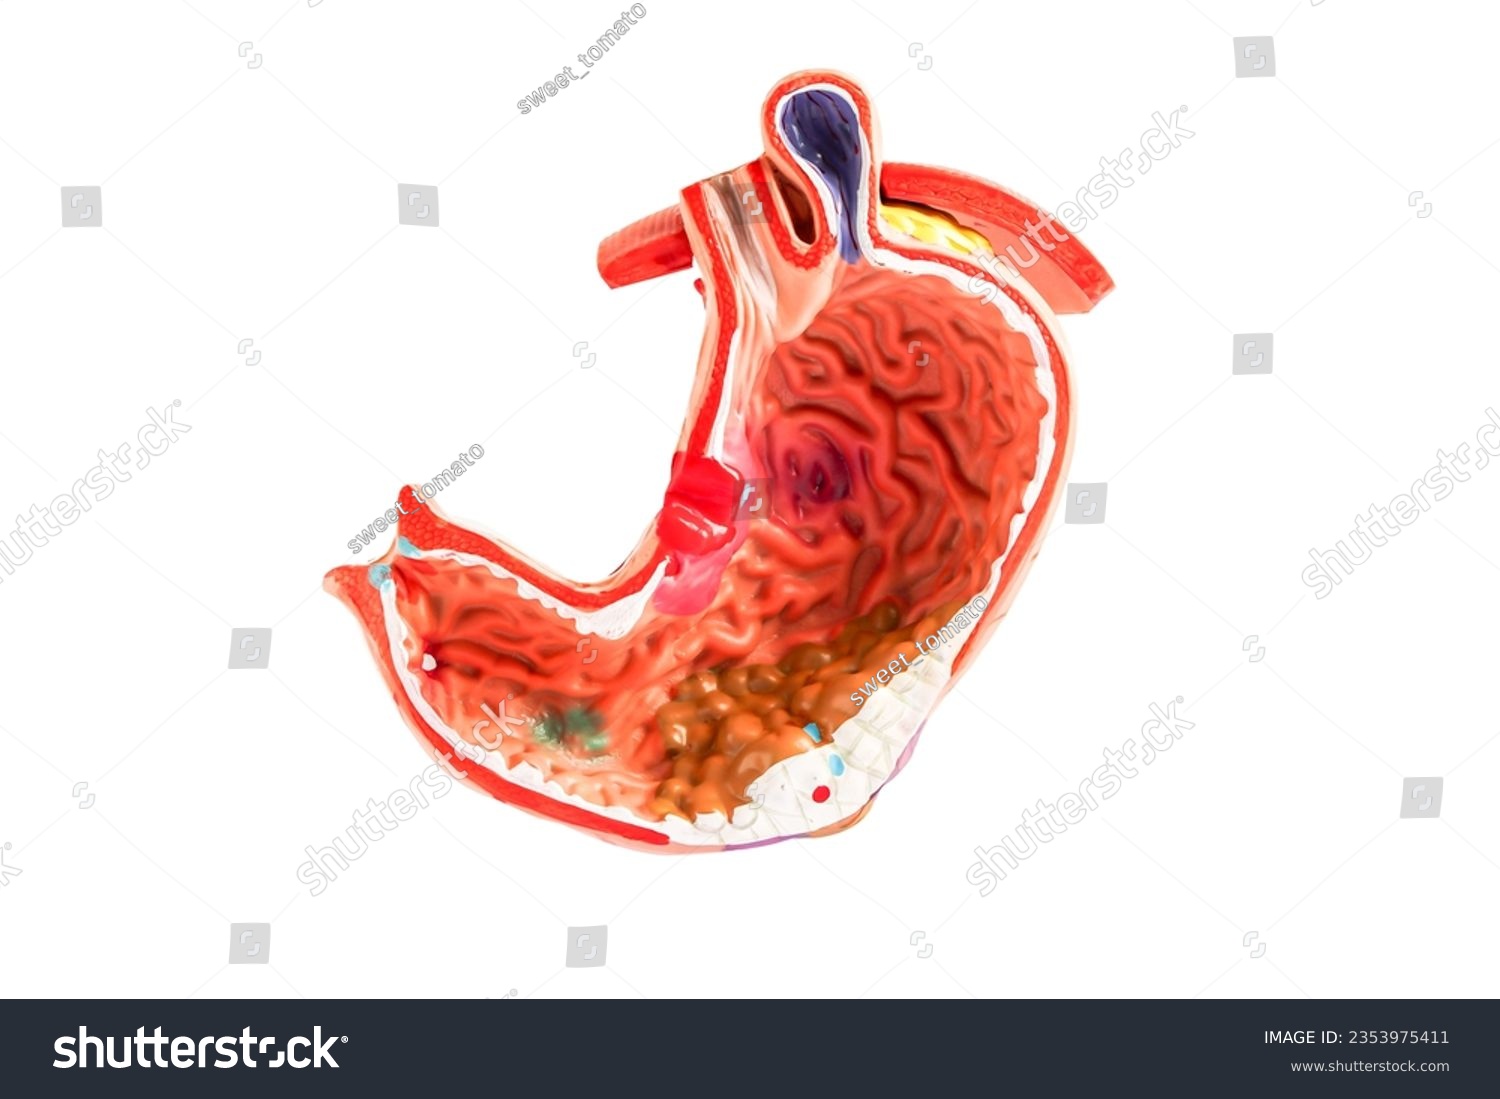 Stomach model isolated on white background with clipping path, anatomy model for study diagnosis and treatment in hospital. #2353975411